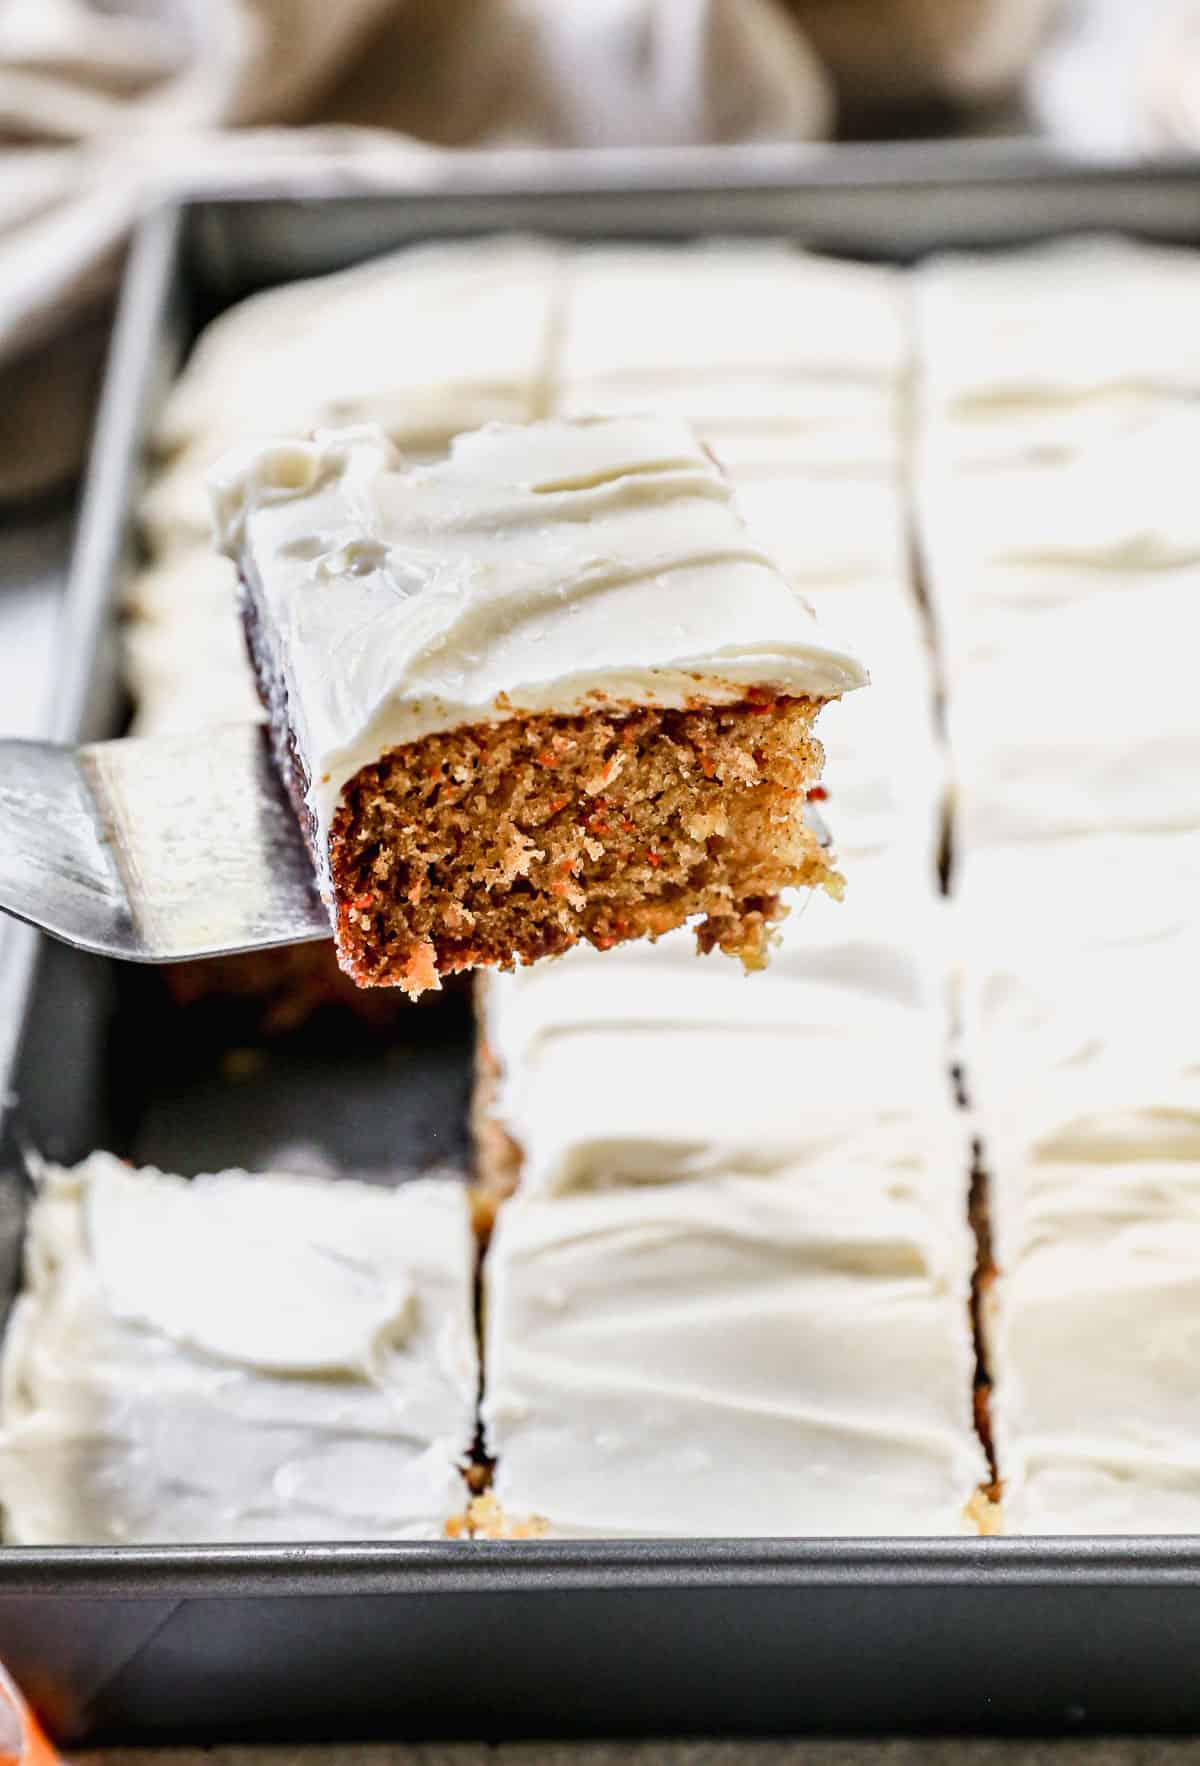 A piece of easy carrot cake being lifted from a 9x13 baking dish with a small spatula.